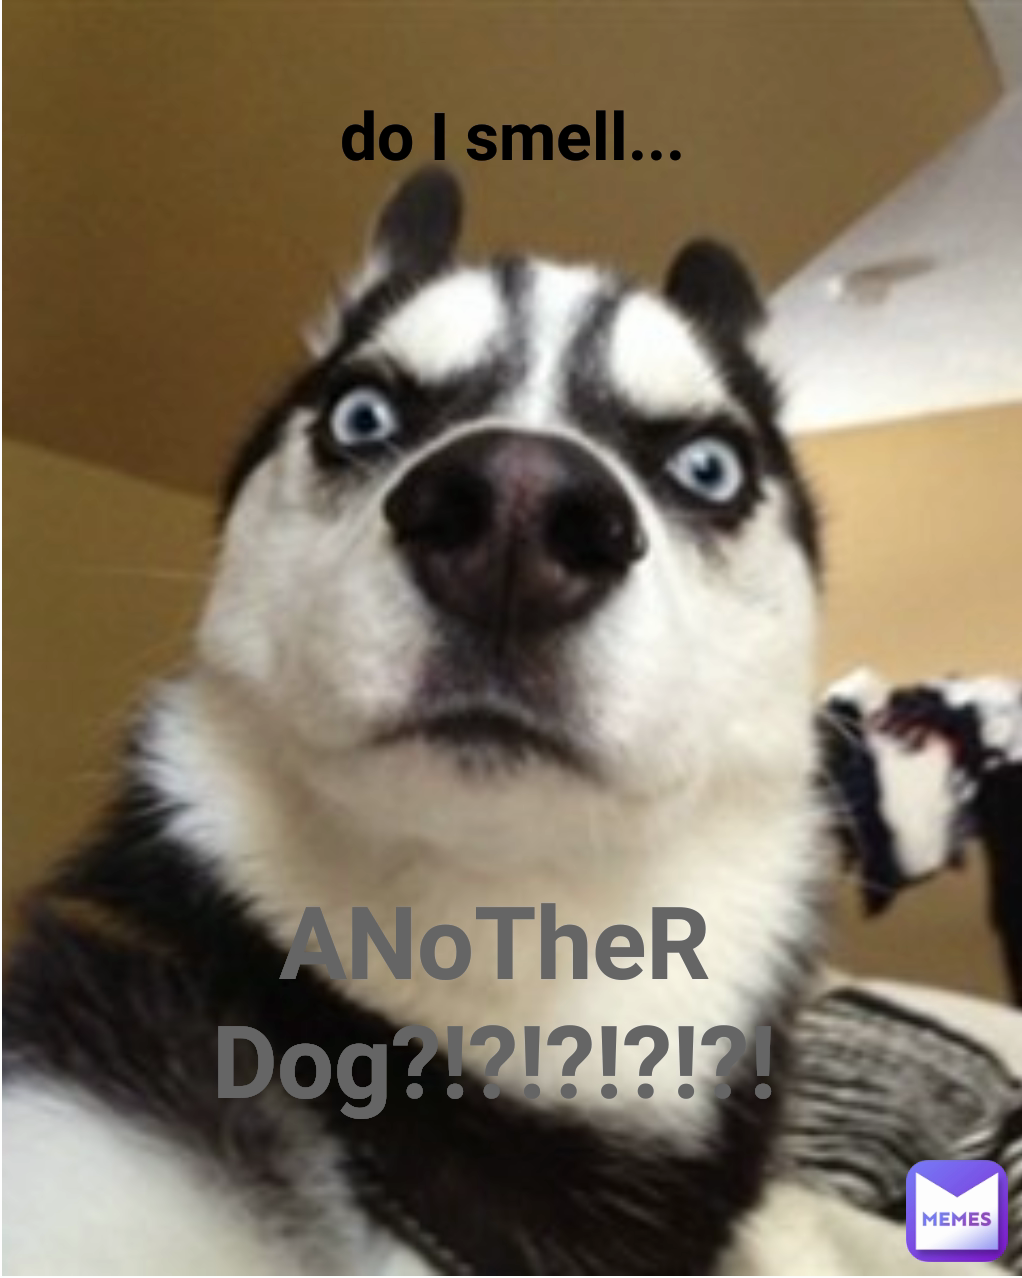 ANoTheR Dog?!?!?!?!?! do I smell...